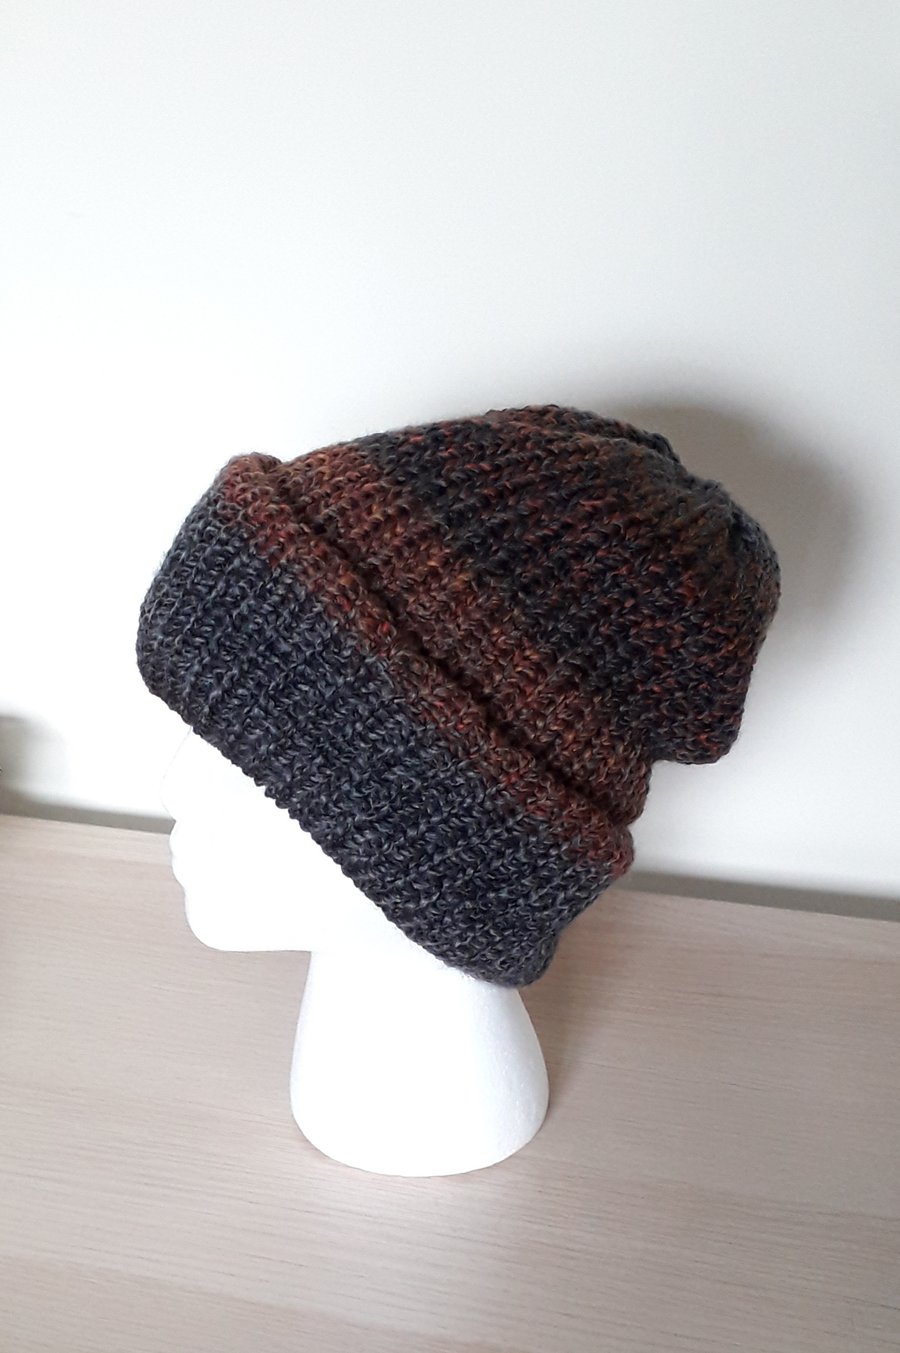 Double thickness Beanie Hat, Adult Size